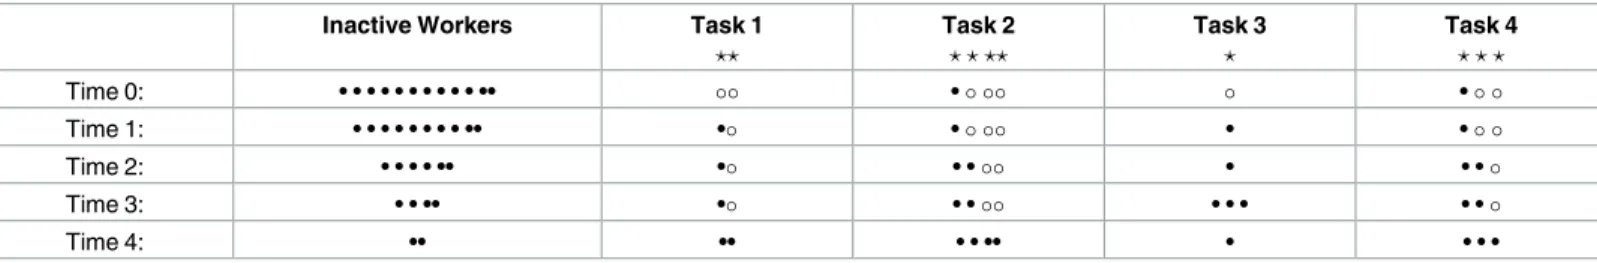 Table 1. Sample execution of a task allocation in our model.